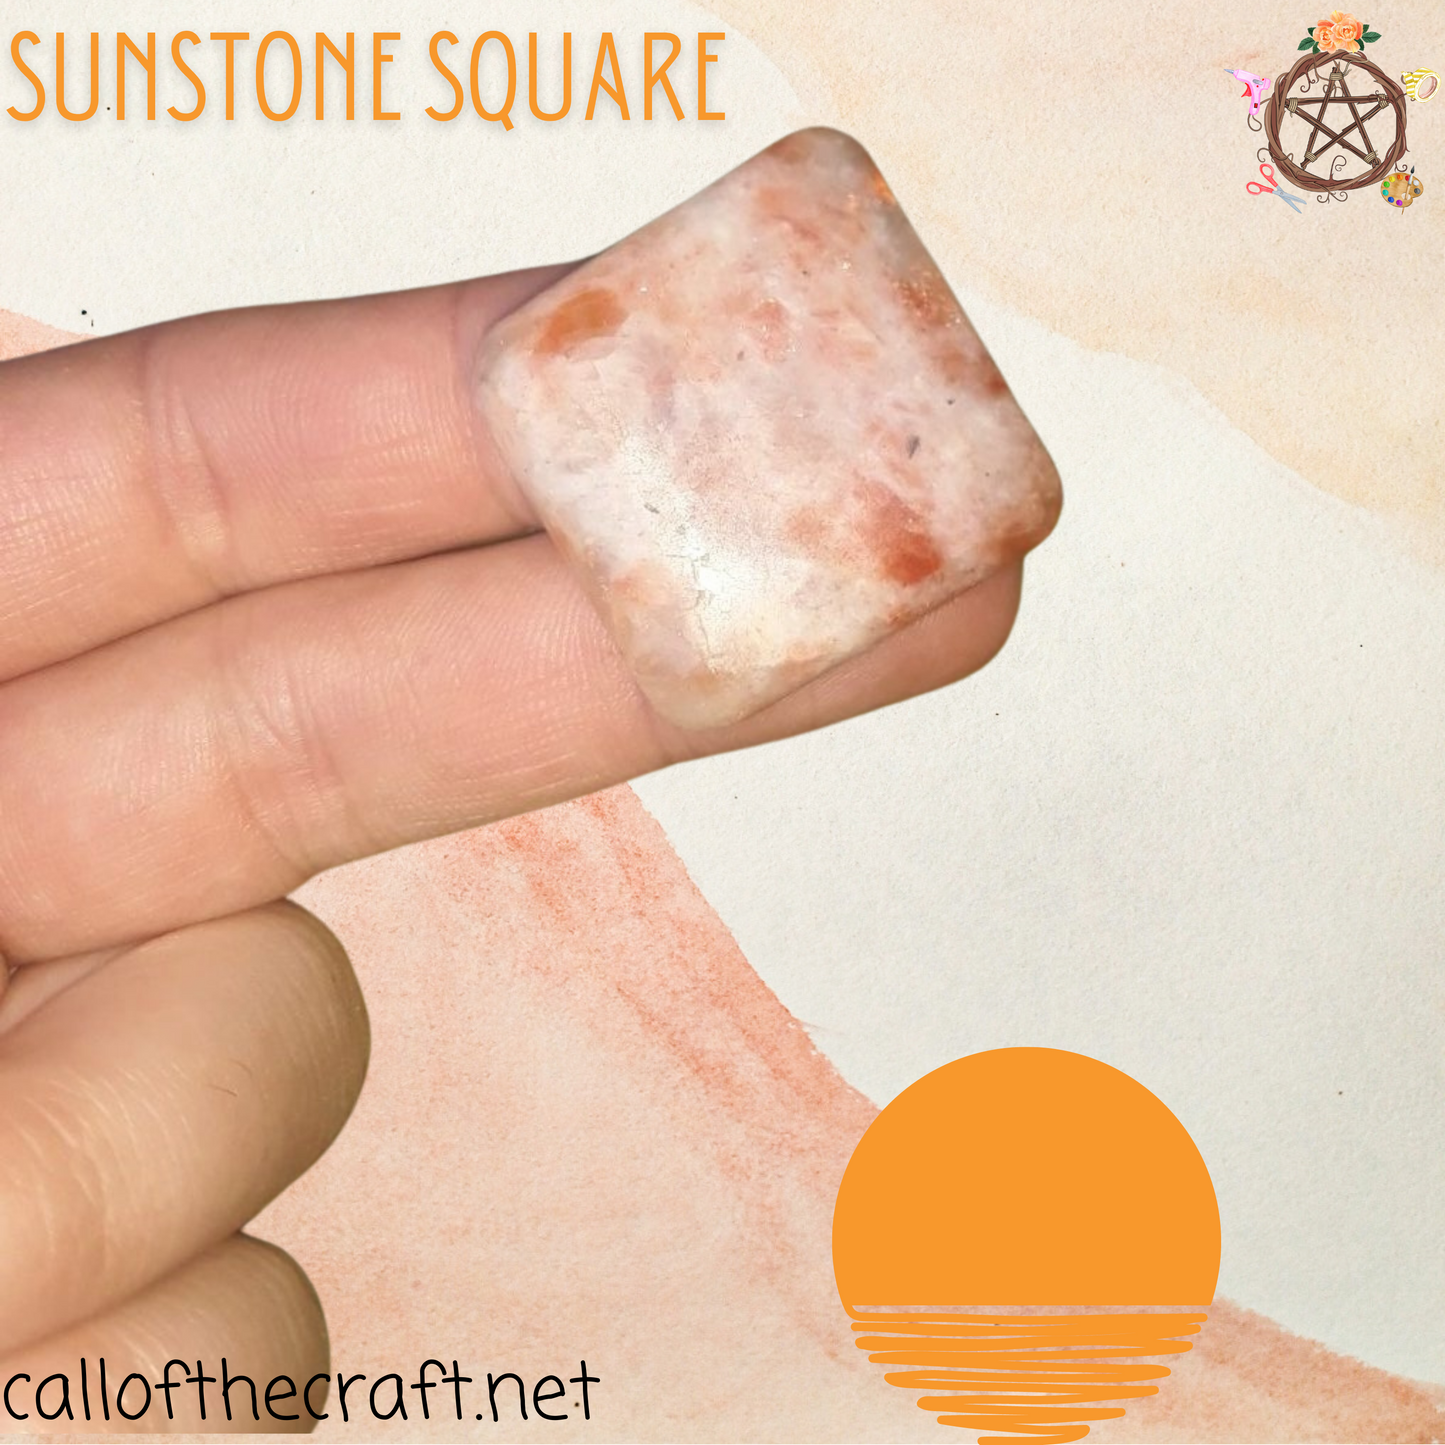 Crystal Carvings, Sunstone Square - The Call of the Craft